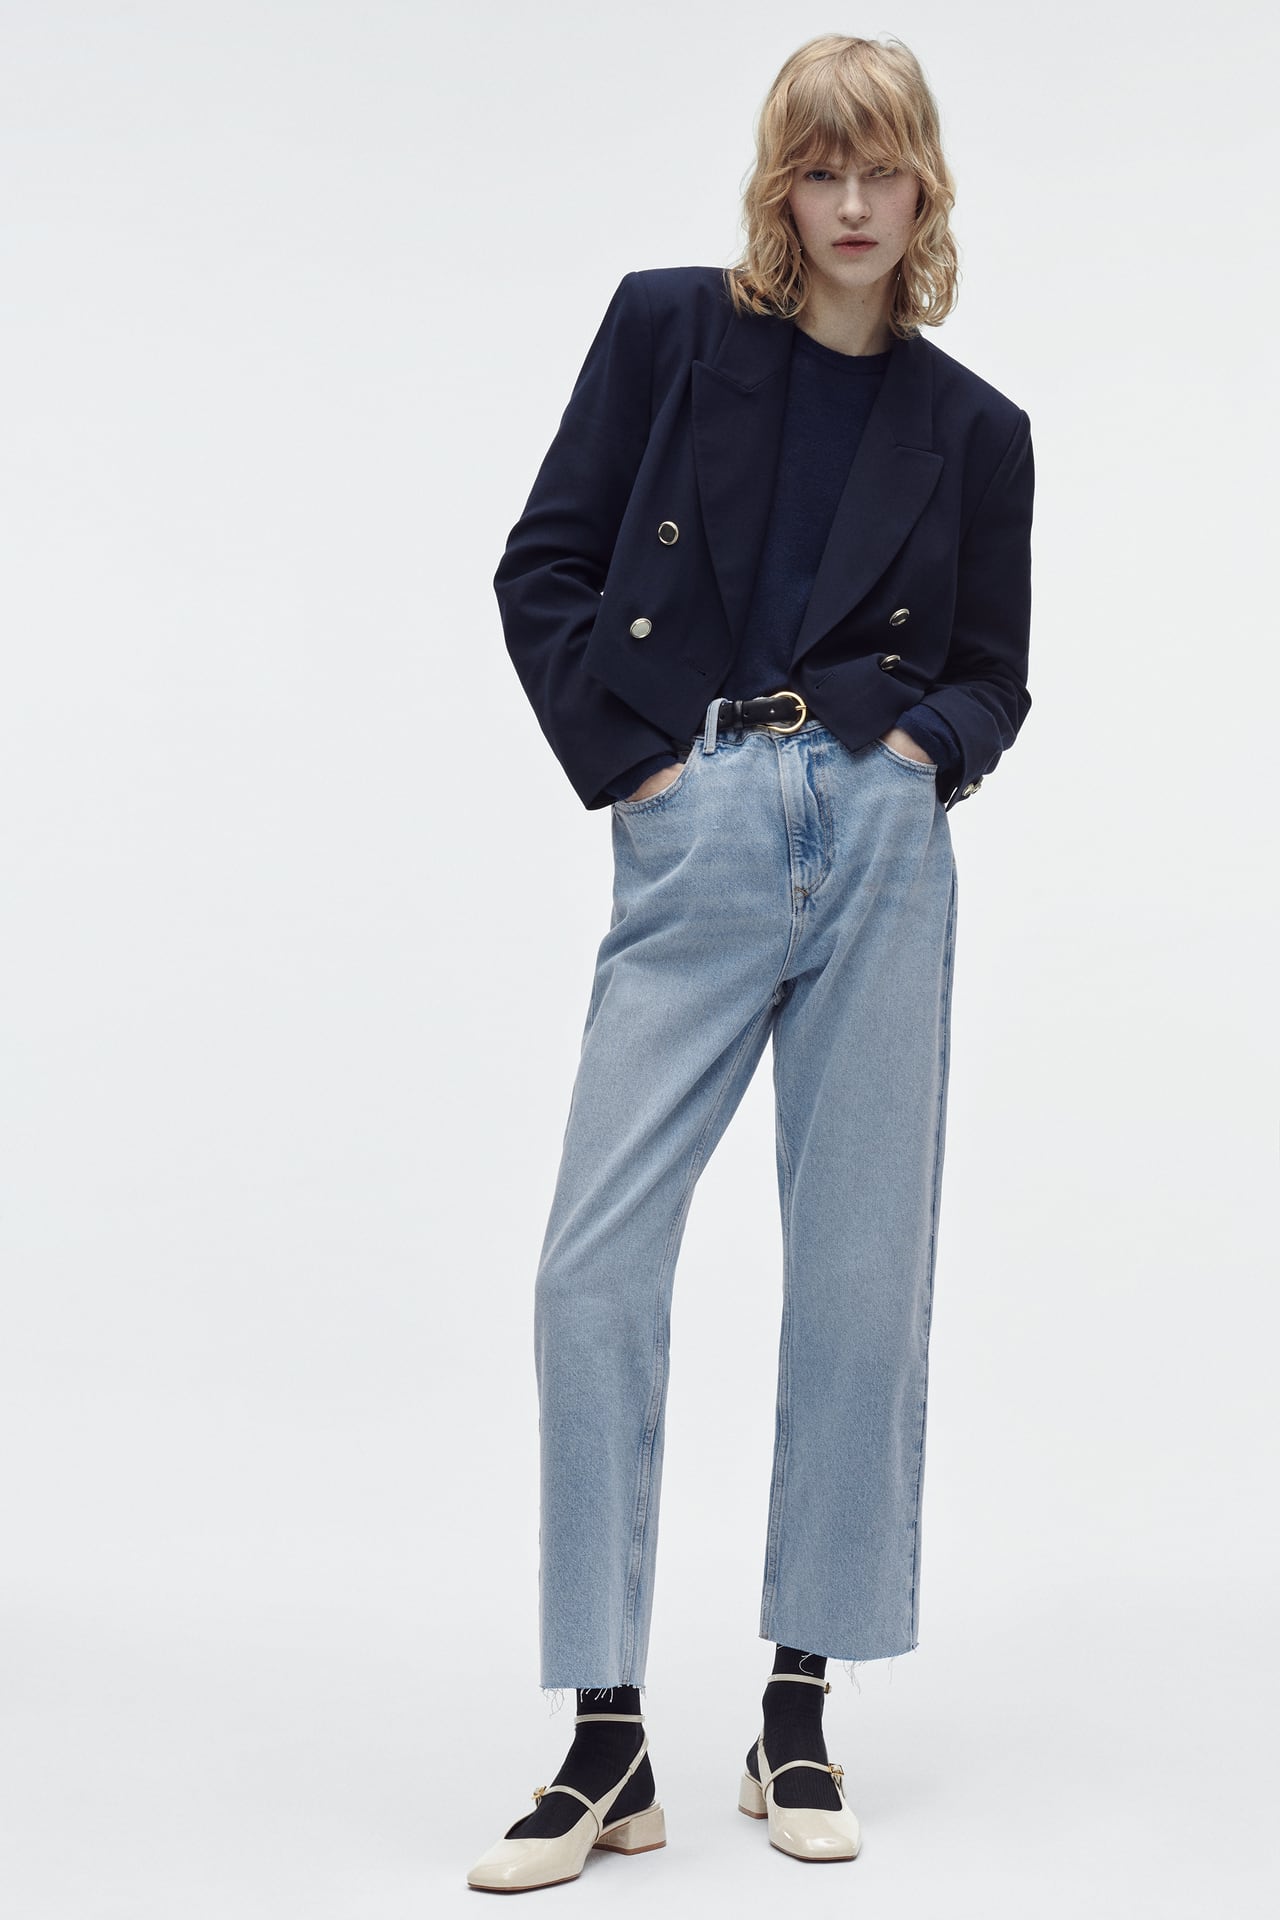 33 Zara New Season Buys You Will Want to See - Found